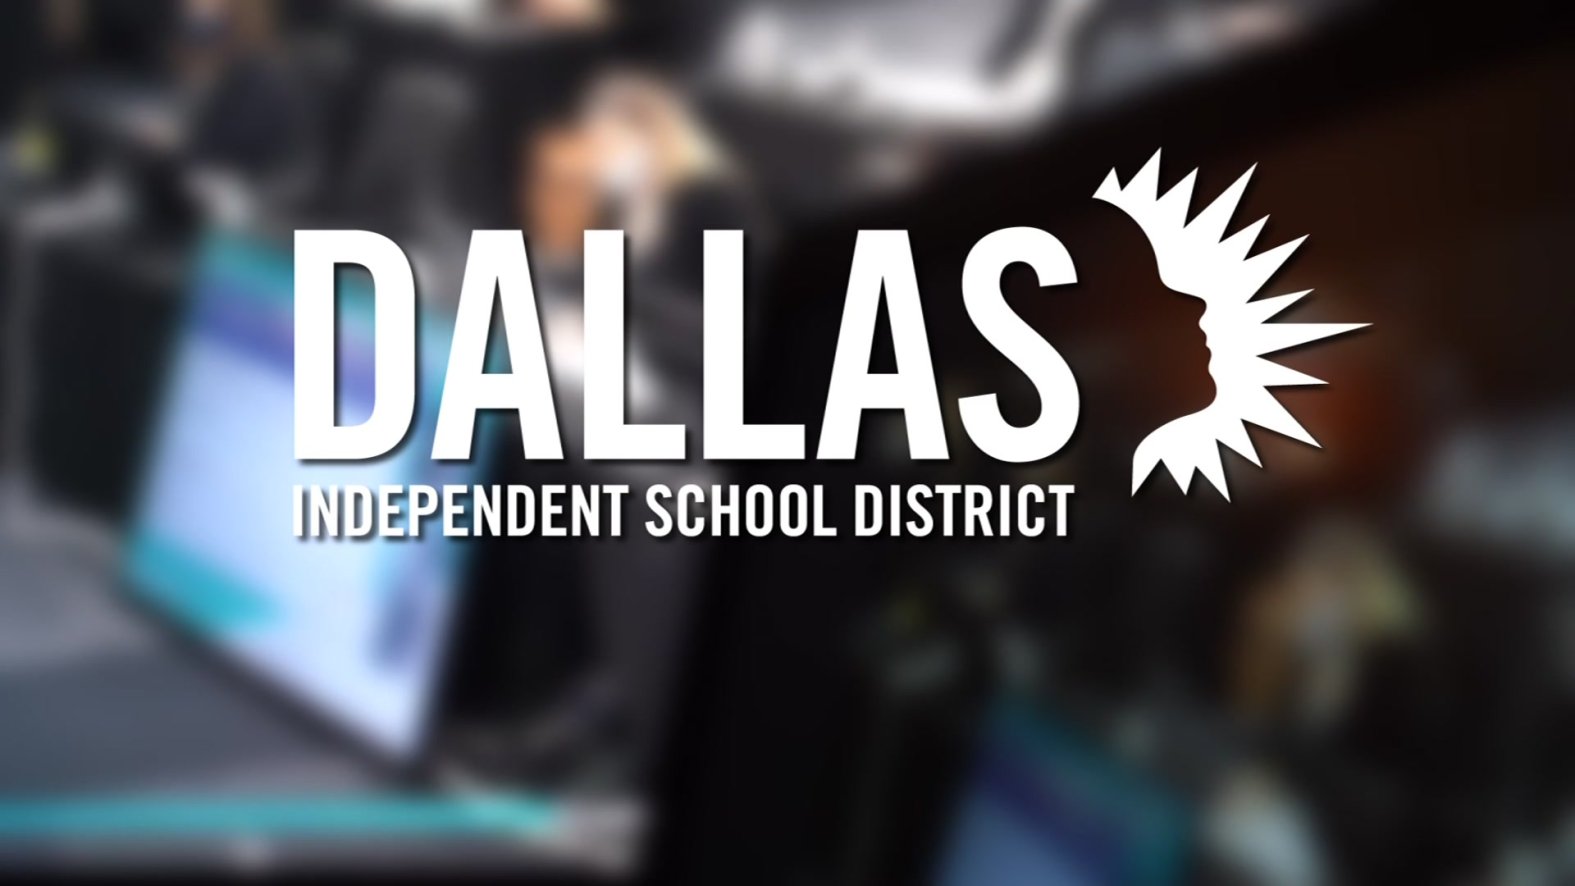 Four Dallas ISD Schools Ranked Among Best in the Nation: U S News and